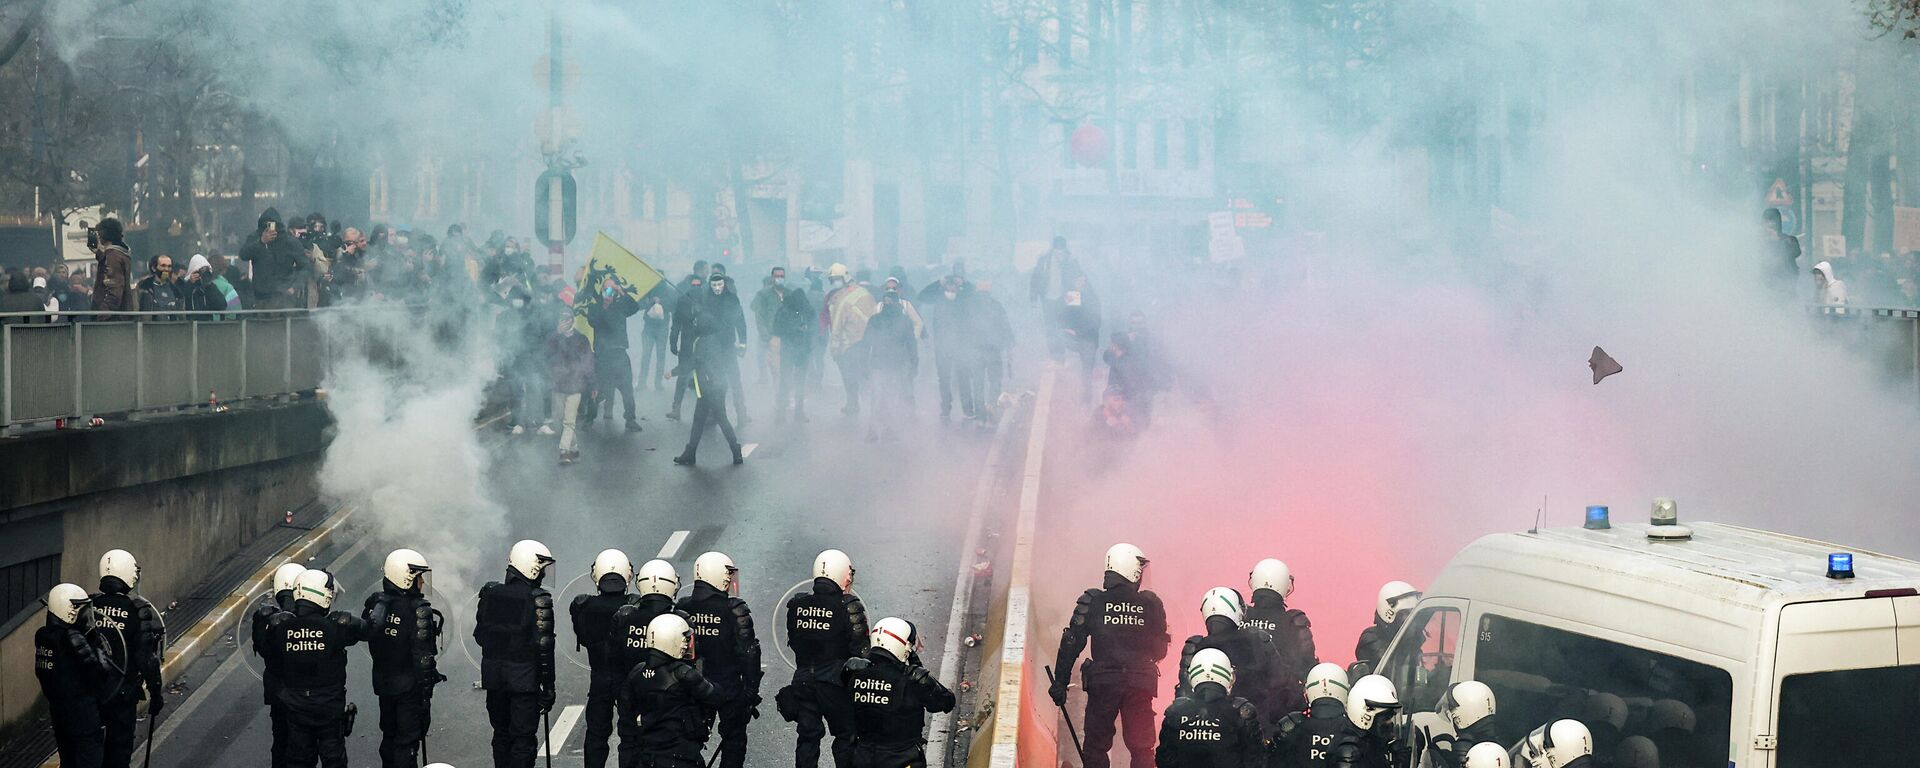 Protesters face riot police as they take part in a demonstration against Covid-19 measures, including the country's health pass, in Brussels on November 21, 2021. (Photo by Kenzo Tribouillard / AFP) - Sputnik International, 1920, 21.11.2021